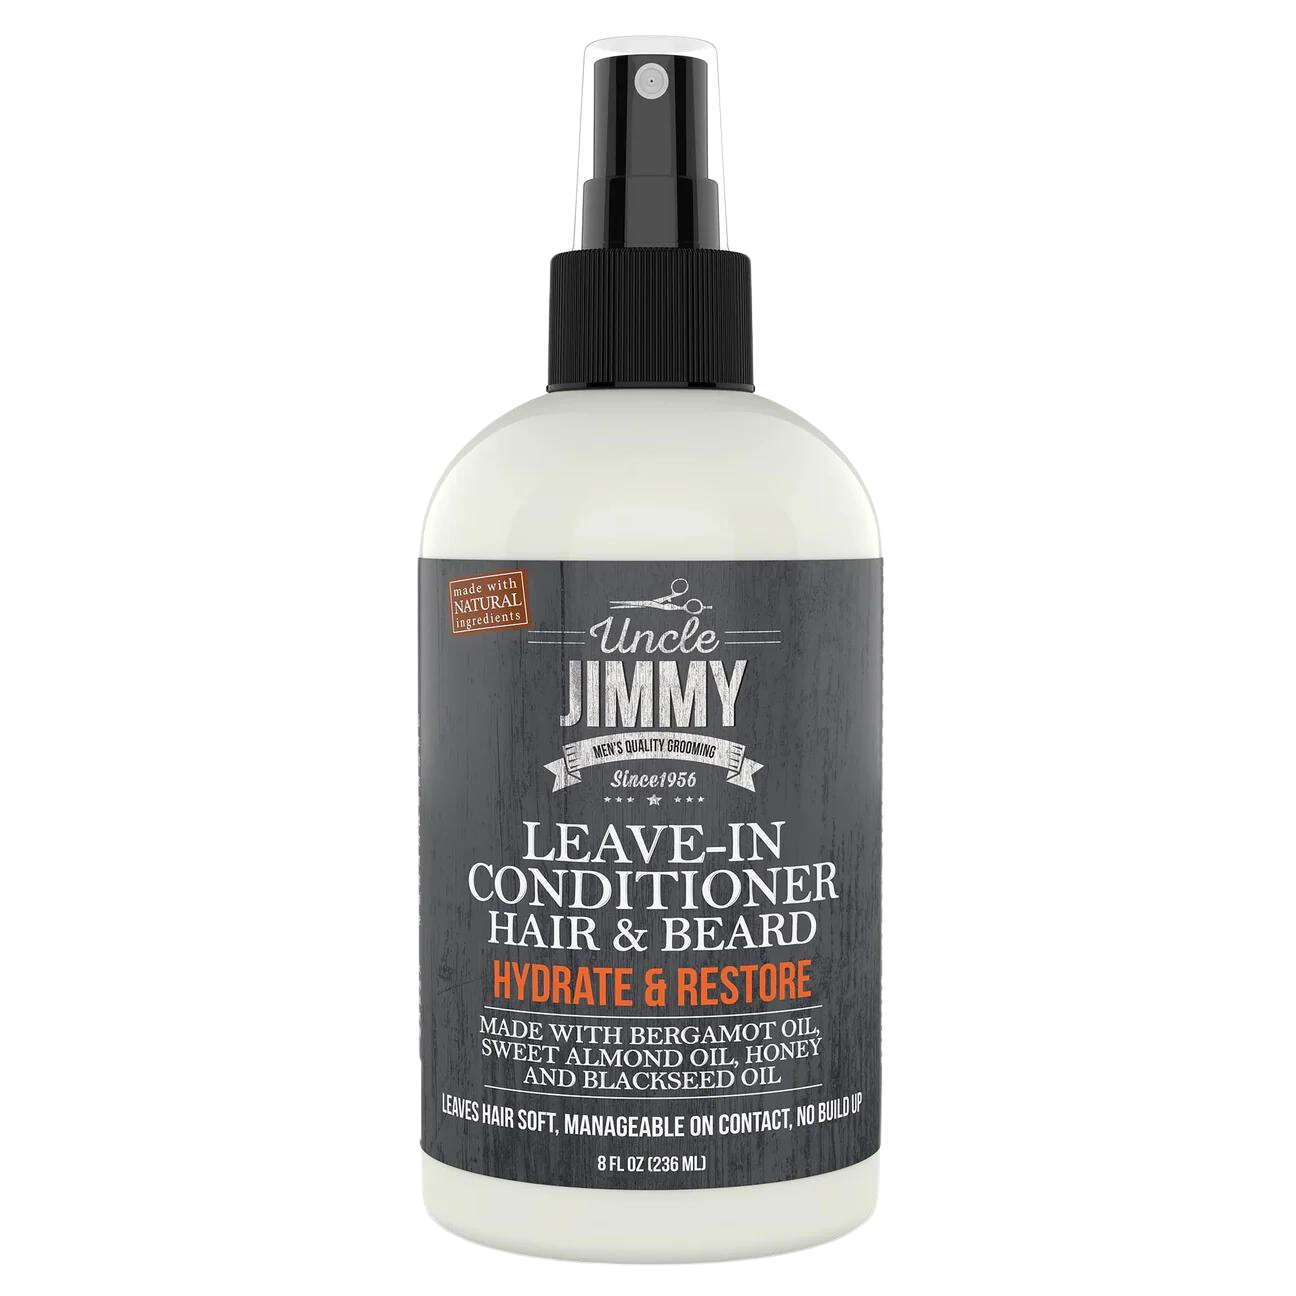 Uncle Jimmy Hair & Beard Leave-In Conditioner 8oz